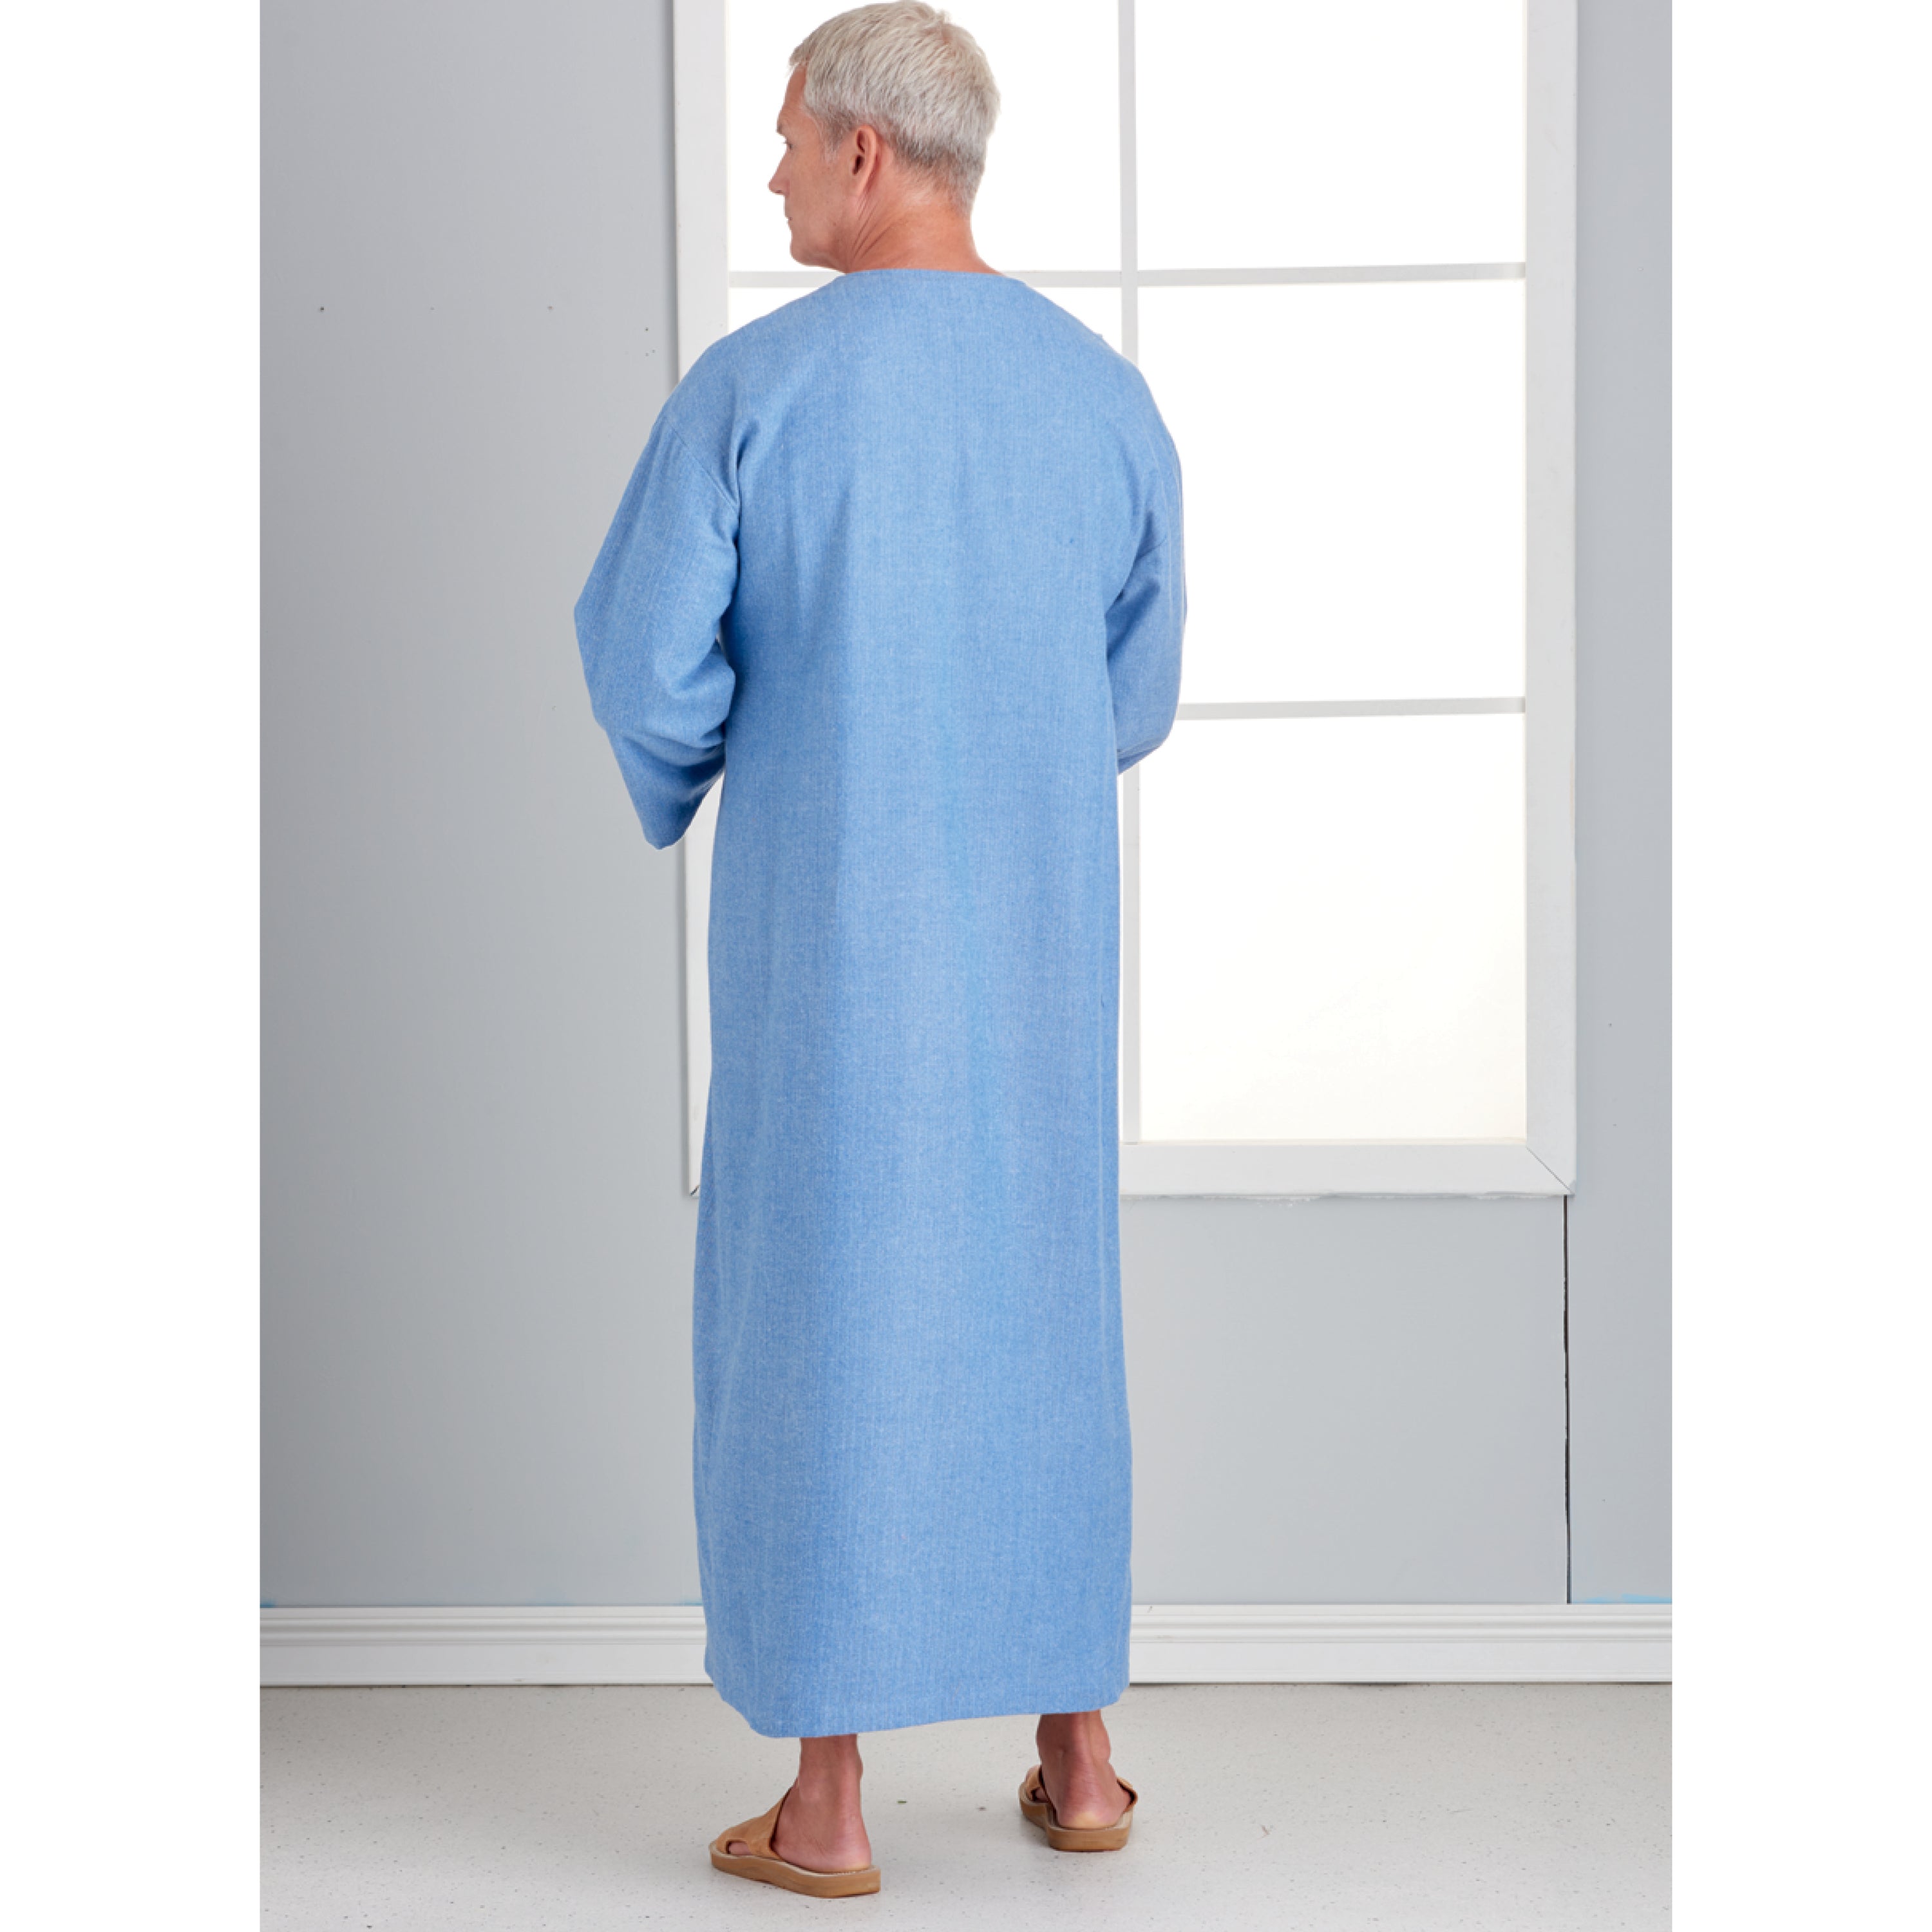 Size 4XL Bariatric Patient Hospital Gown, Blue Diamond Pattern, Washable  Polycotton Fabric, Waist Tie, As Used by NHS : Amazon.co.uk: Business,  Industry & Science